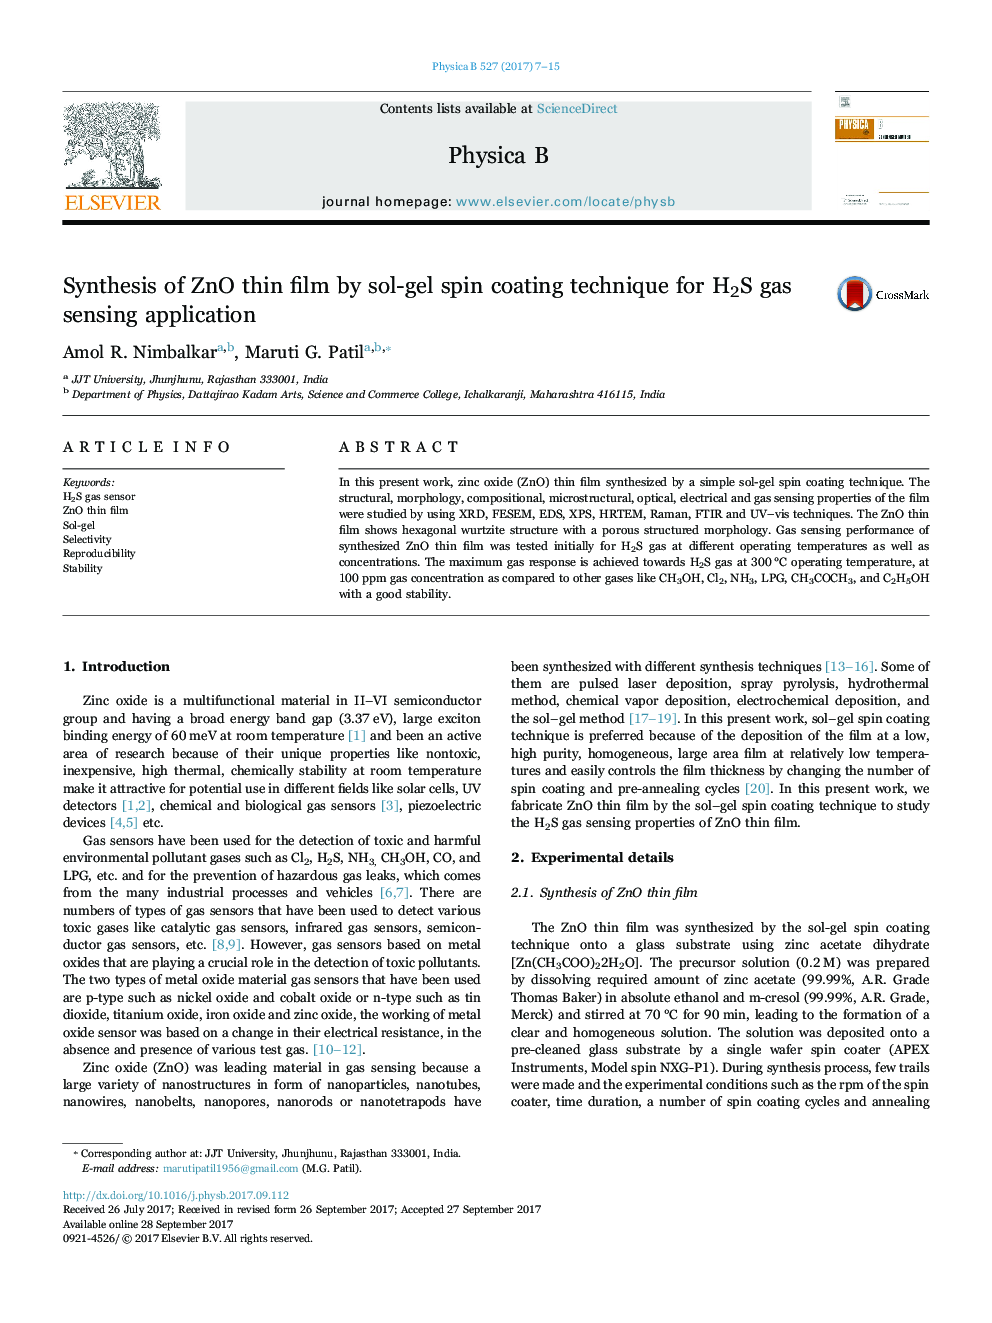 Synthesis of ZnO thin film by sol-gel spin coating technique for H2S gas sensing application